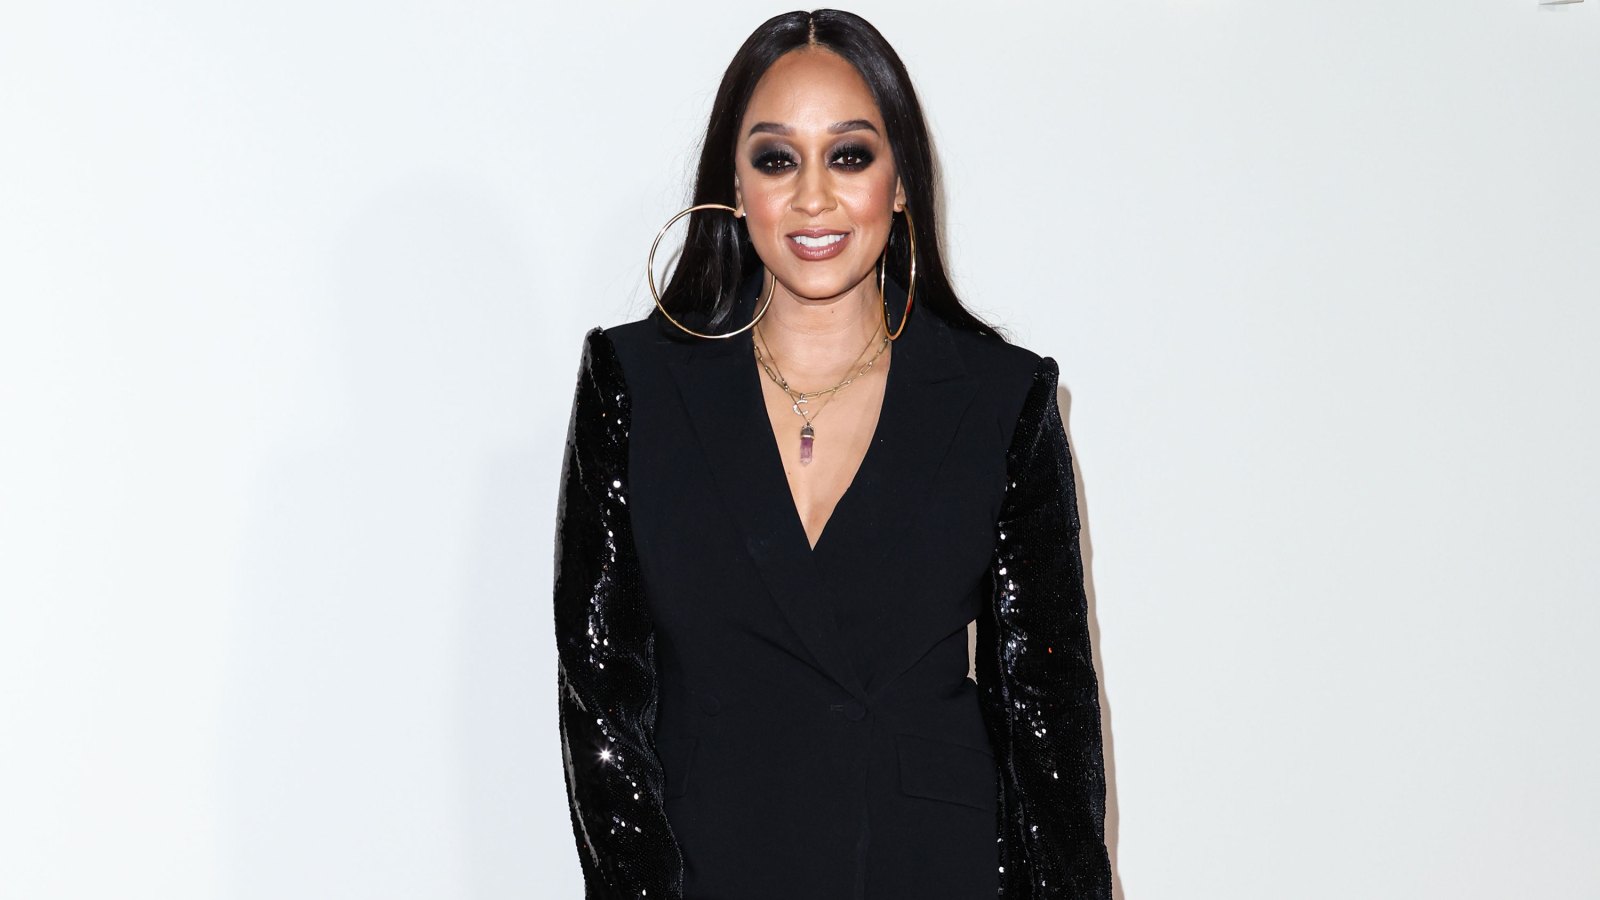 Tia Mowry Rocked a Leopard Print Bodysuit and Thigh-High Boots — But Her Son Cree Disapproved